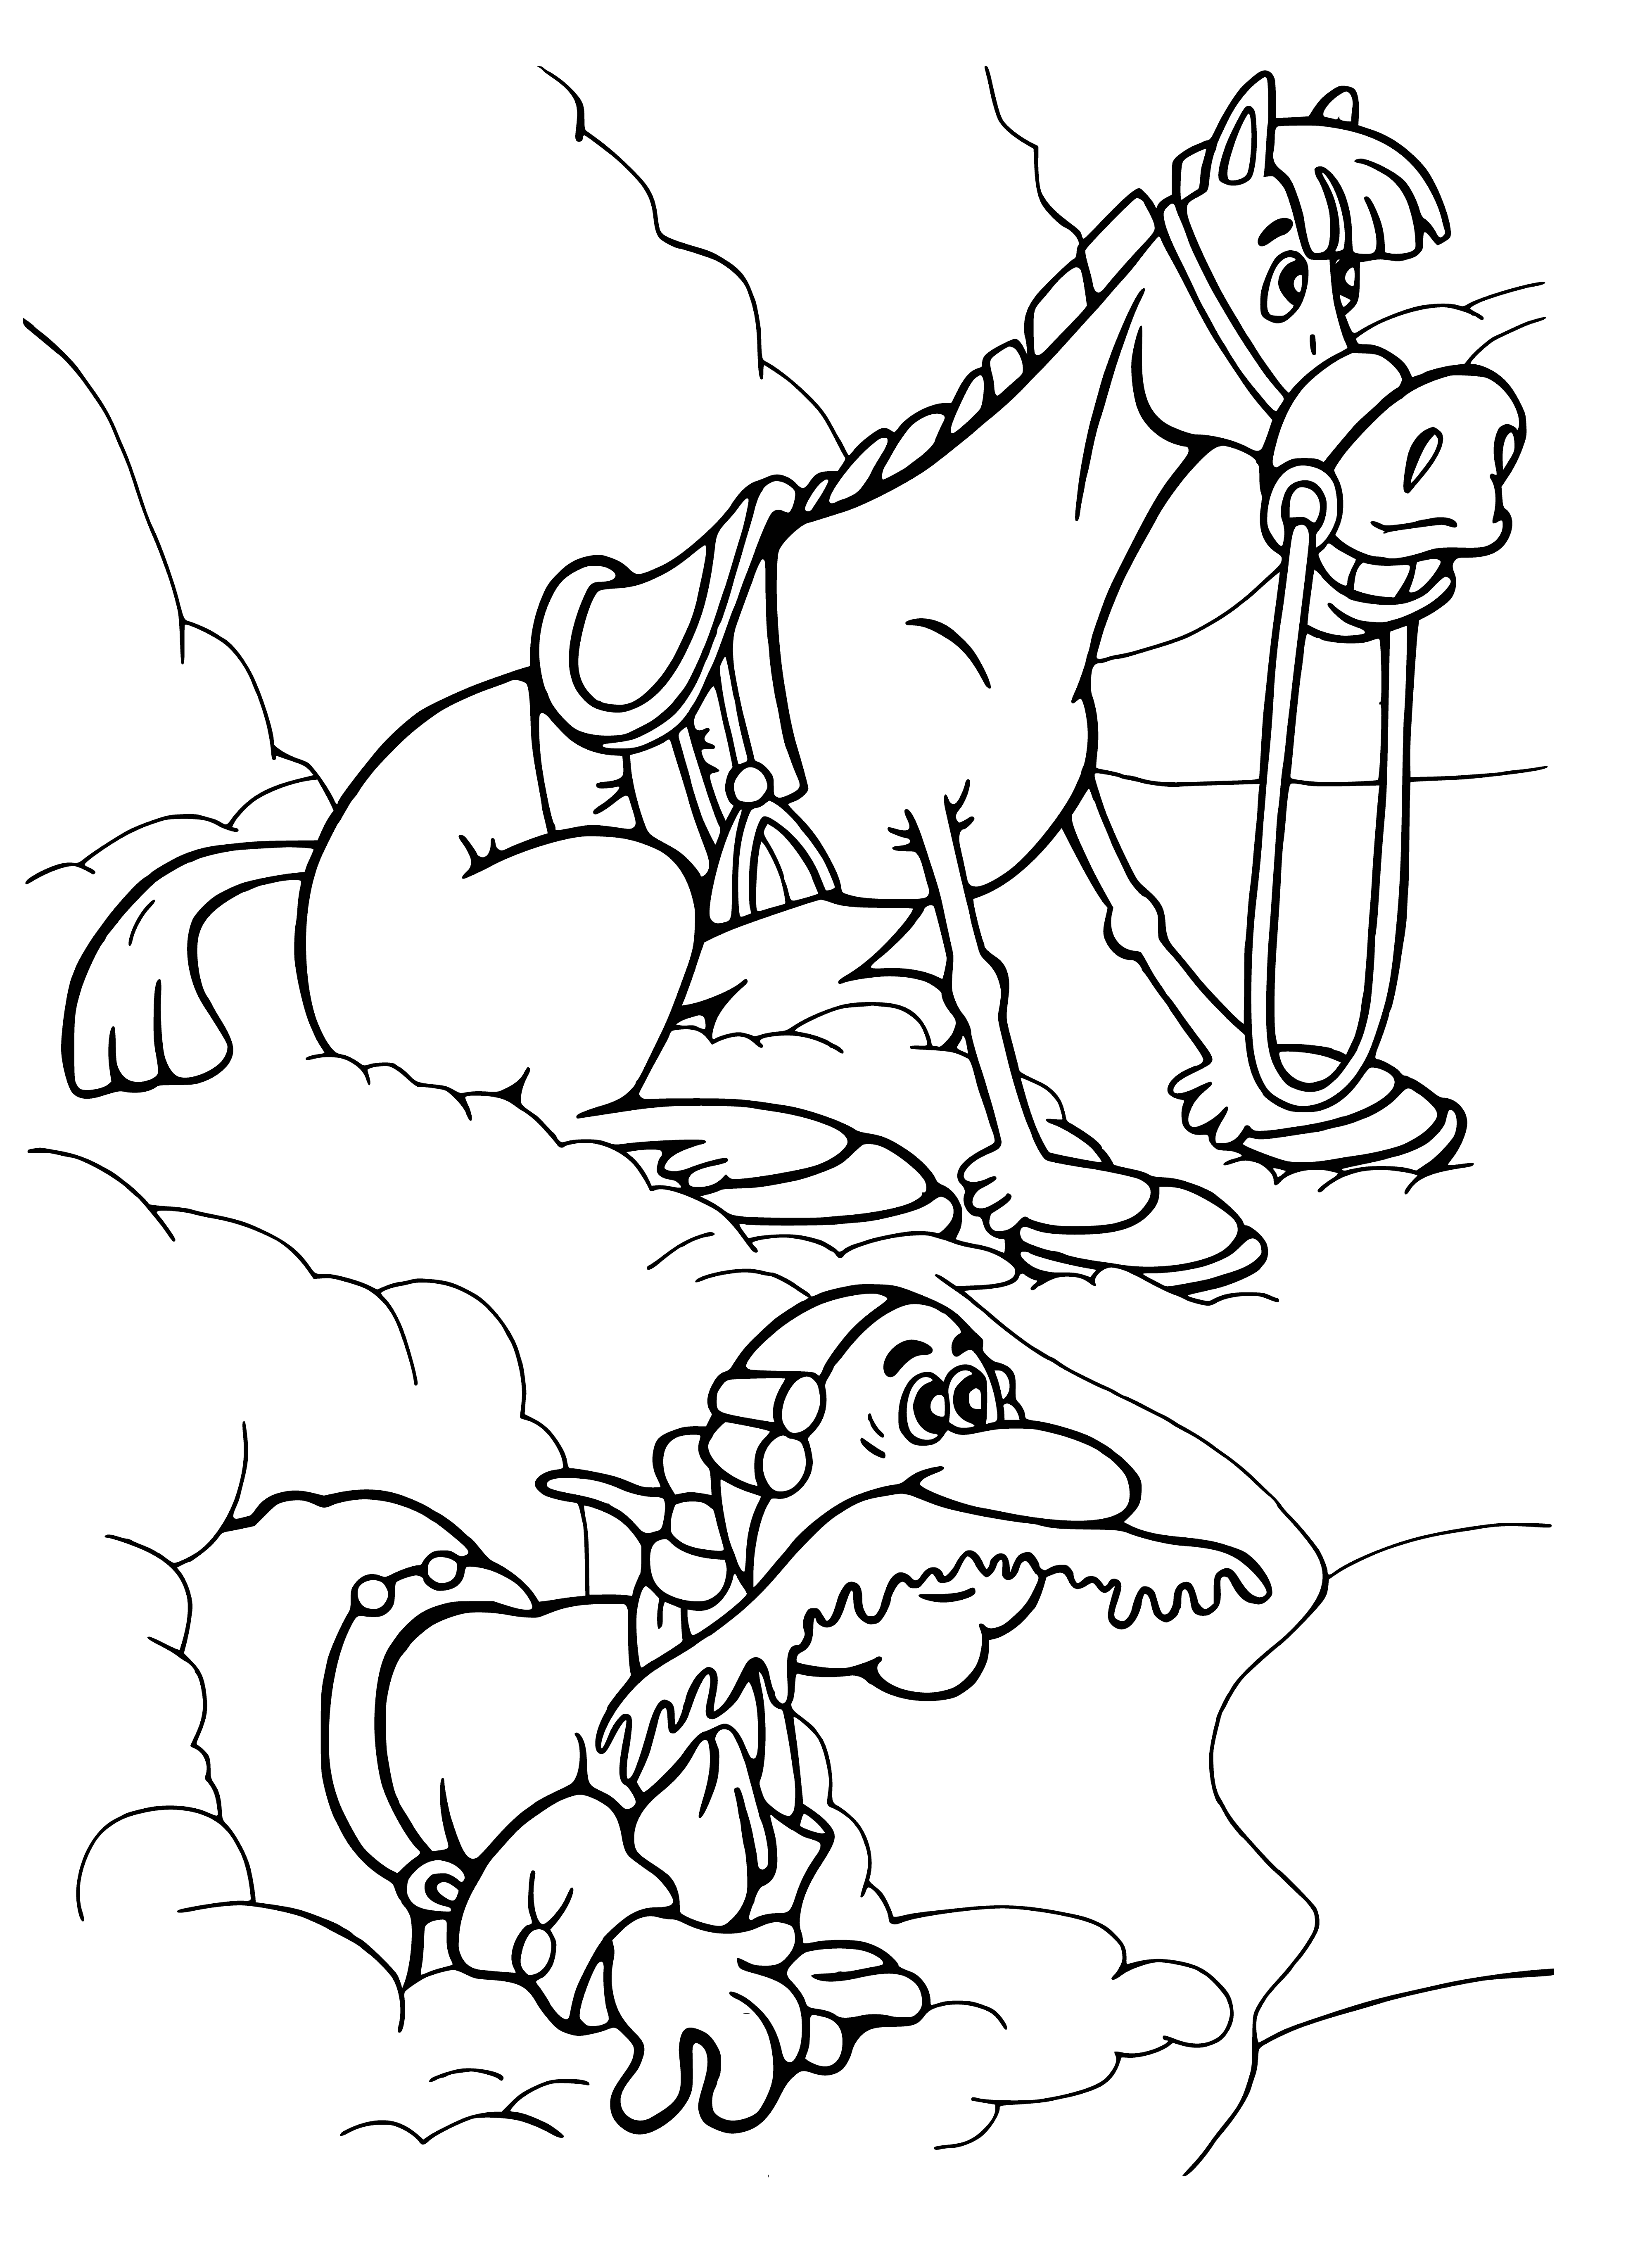 coloring page: Munichausen tells stories of his travels to far-off places, meeting famous people and embarking on daring adventures.